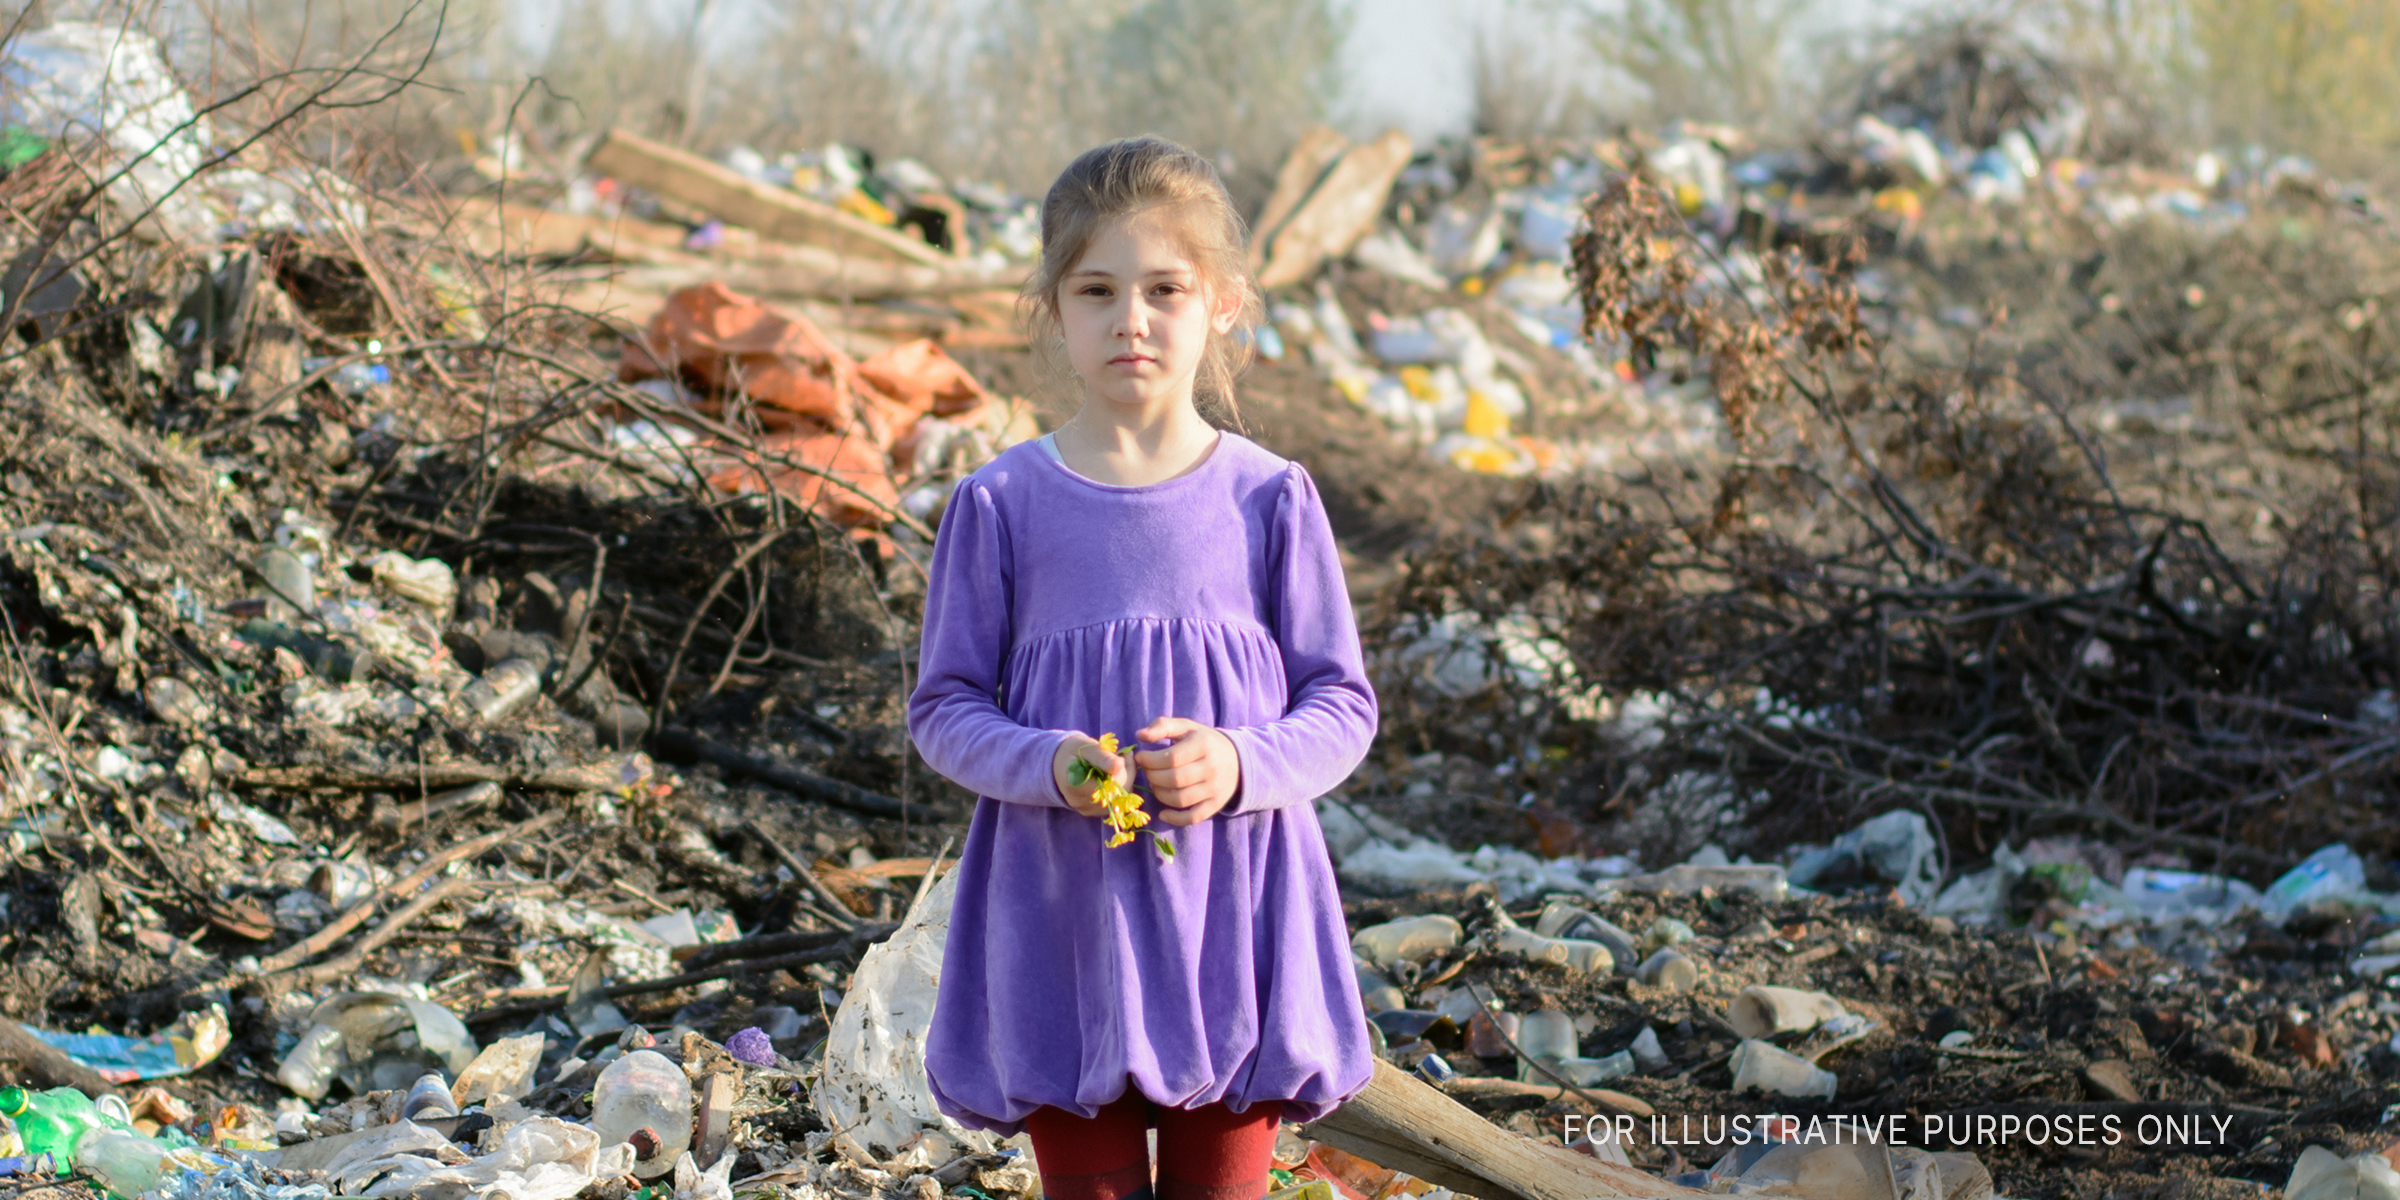 Lonely little girl in a violet dress at a landfill site | Source: Shutterstock